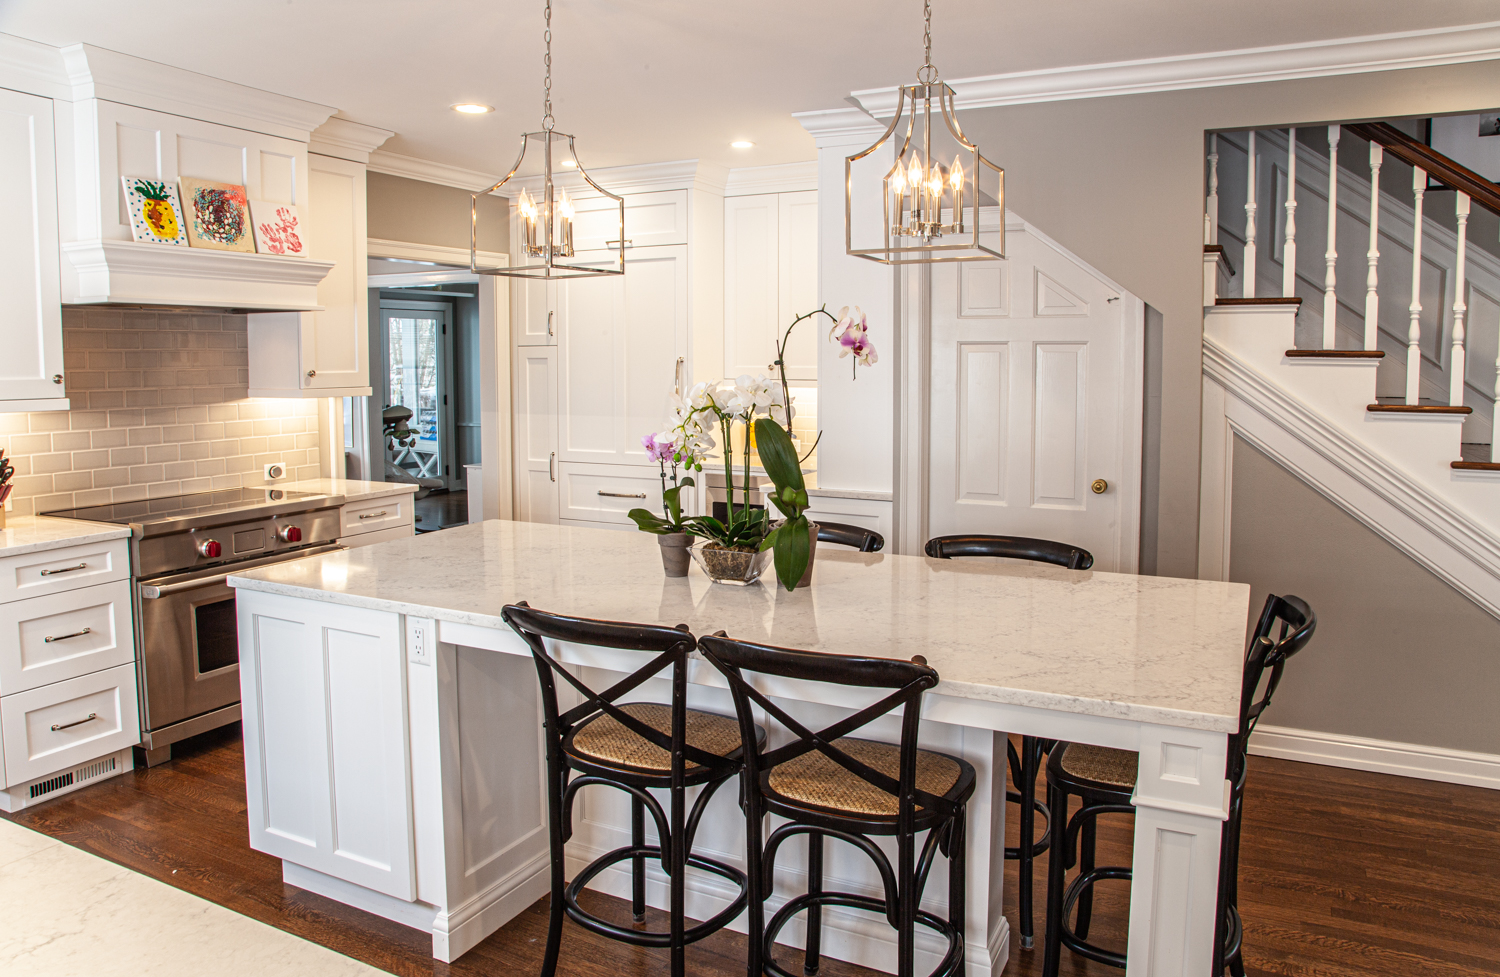 The old becomes new - Dream House Dream Kitchens